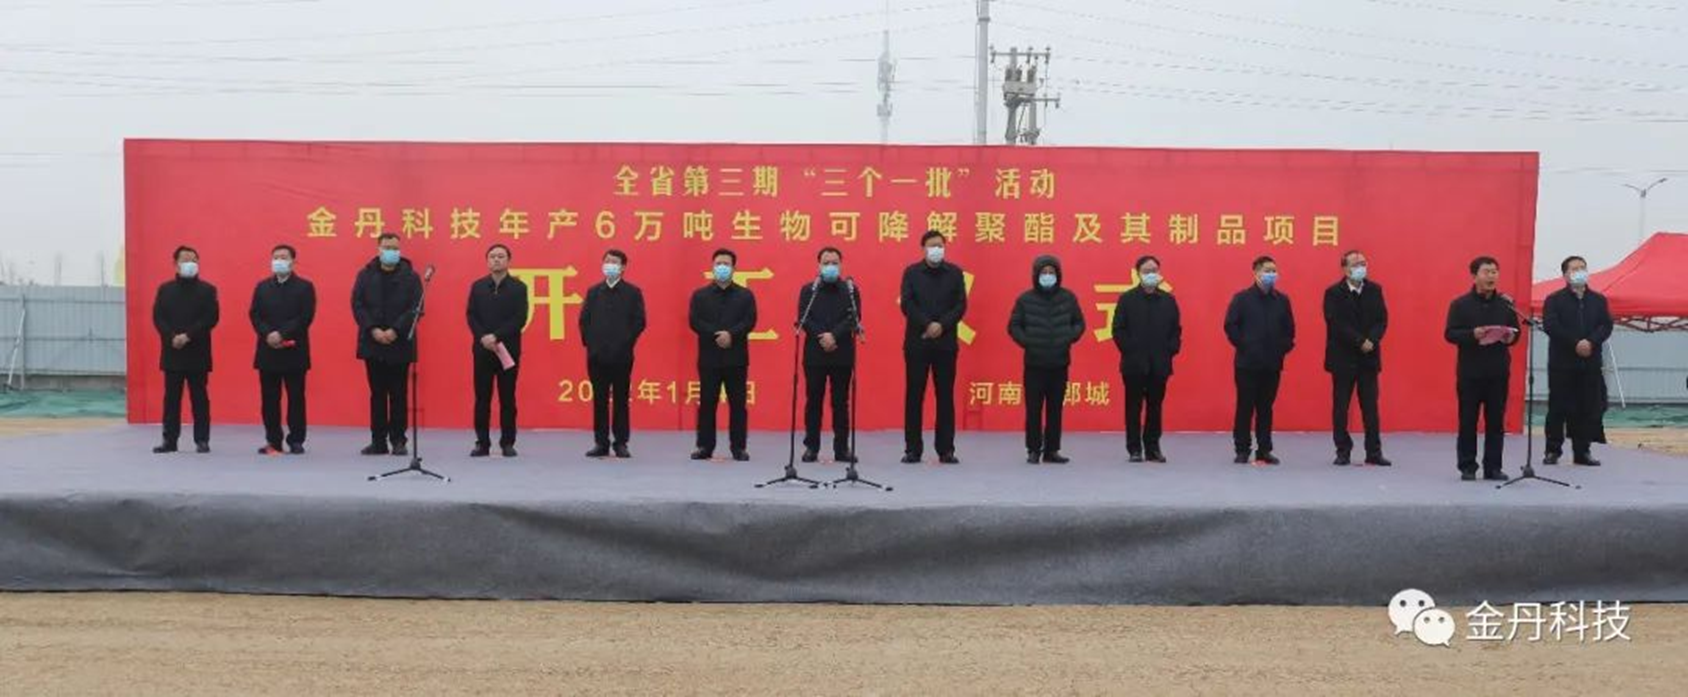 The third phase of the Dancheng Country project construction was held in Jindan